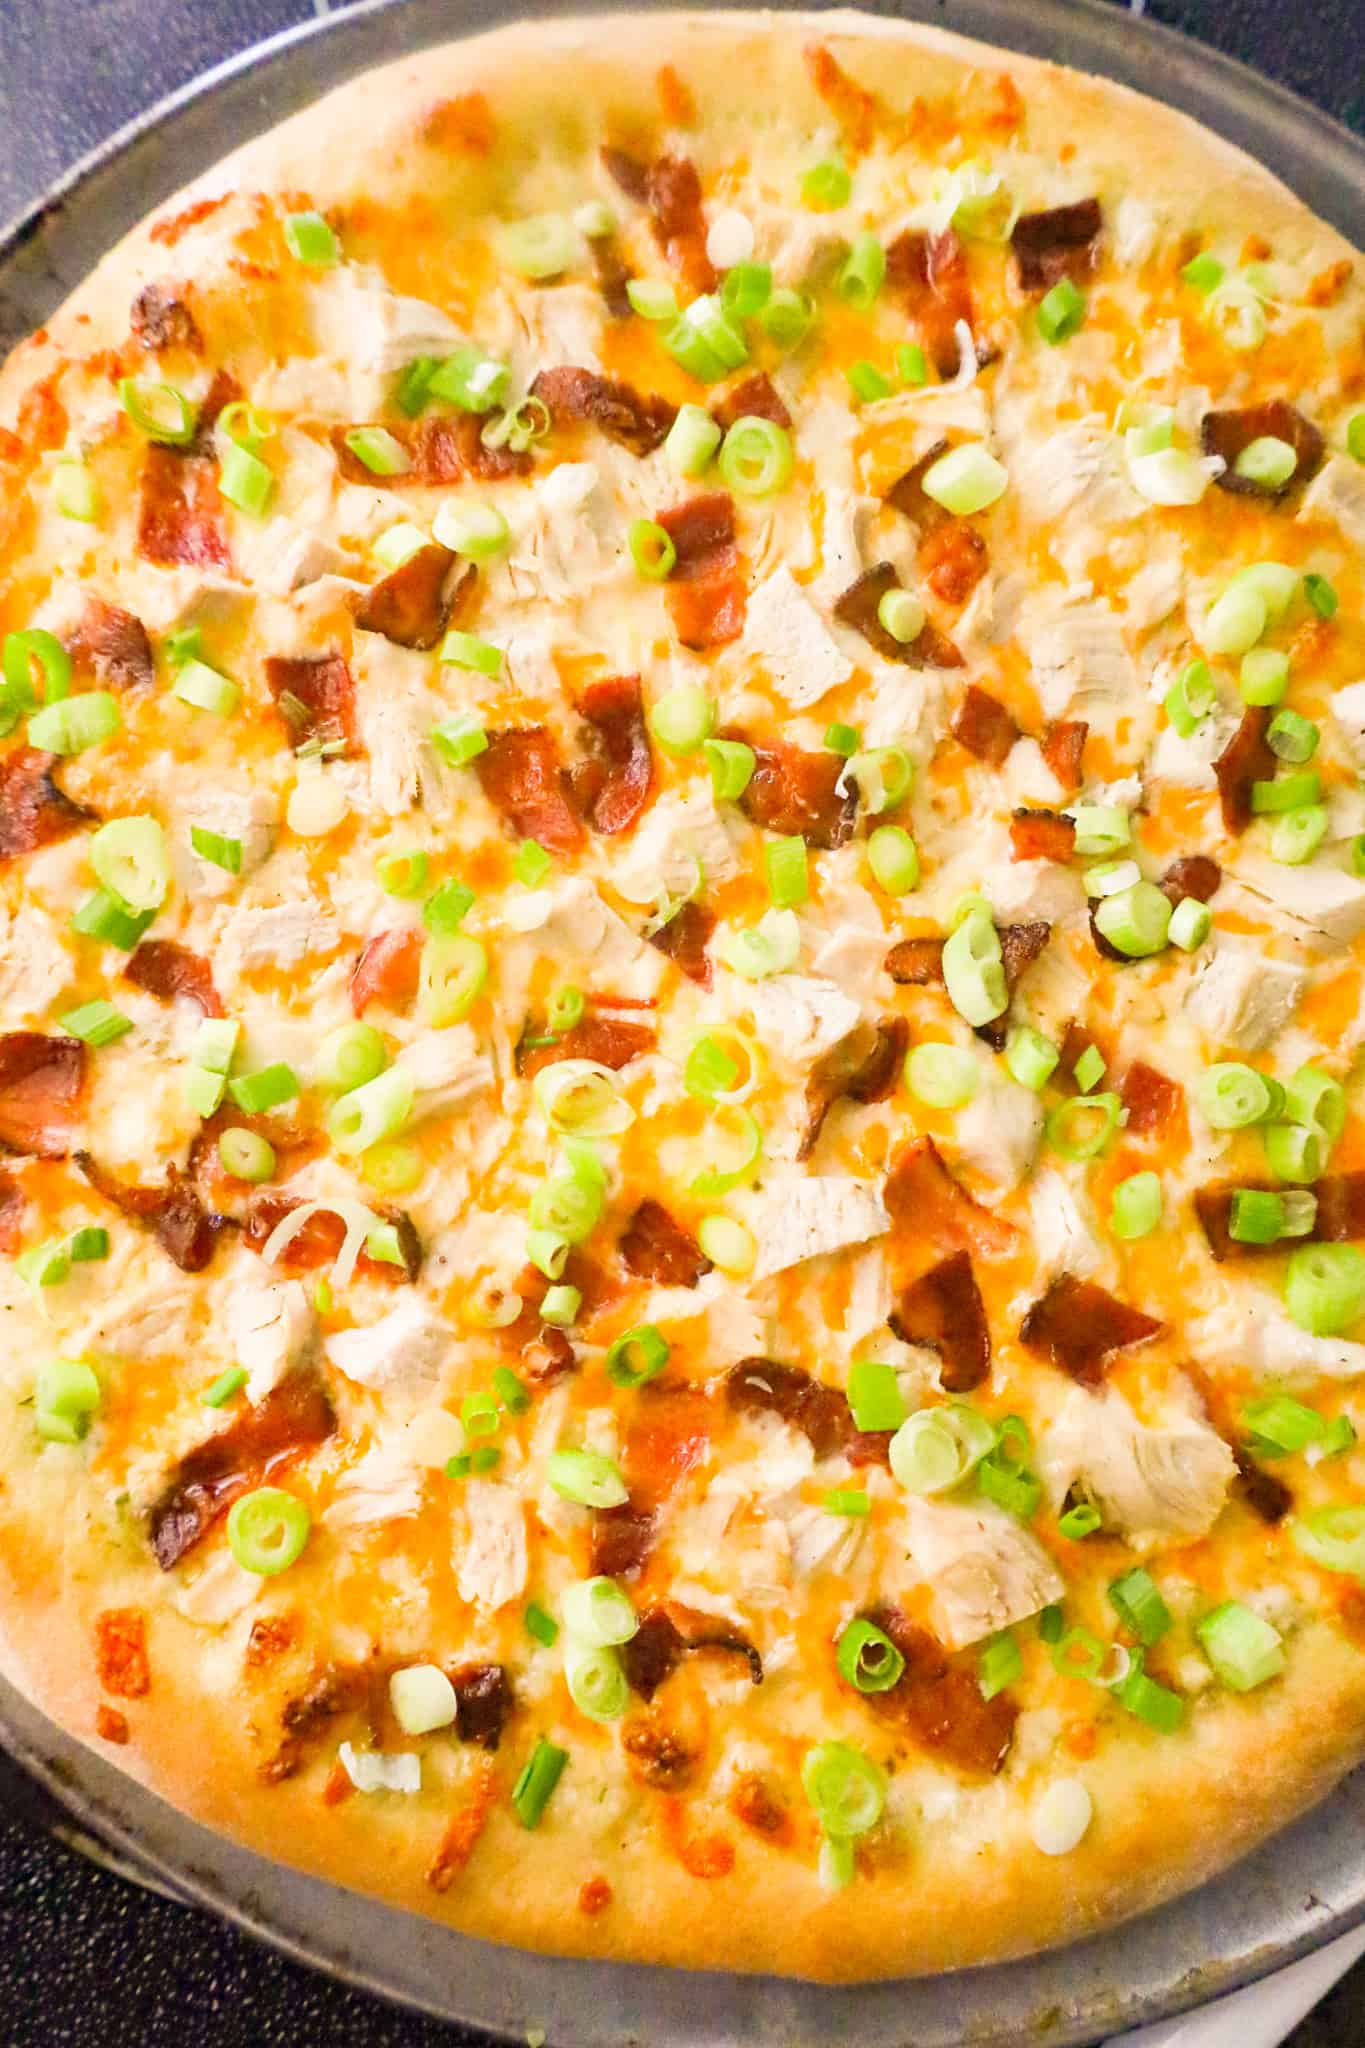 chopped green onions on top of chicken and bacon pizza after baking